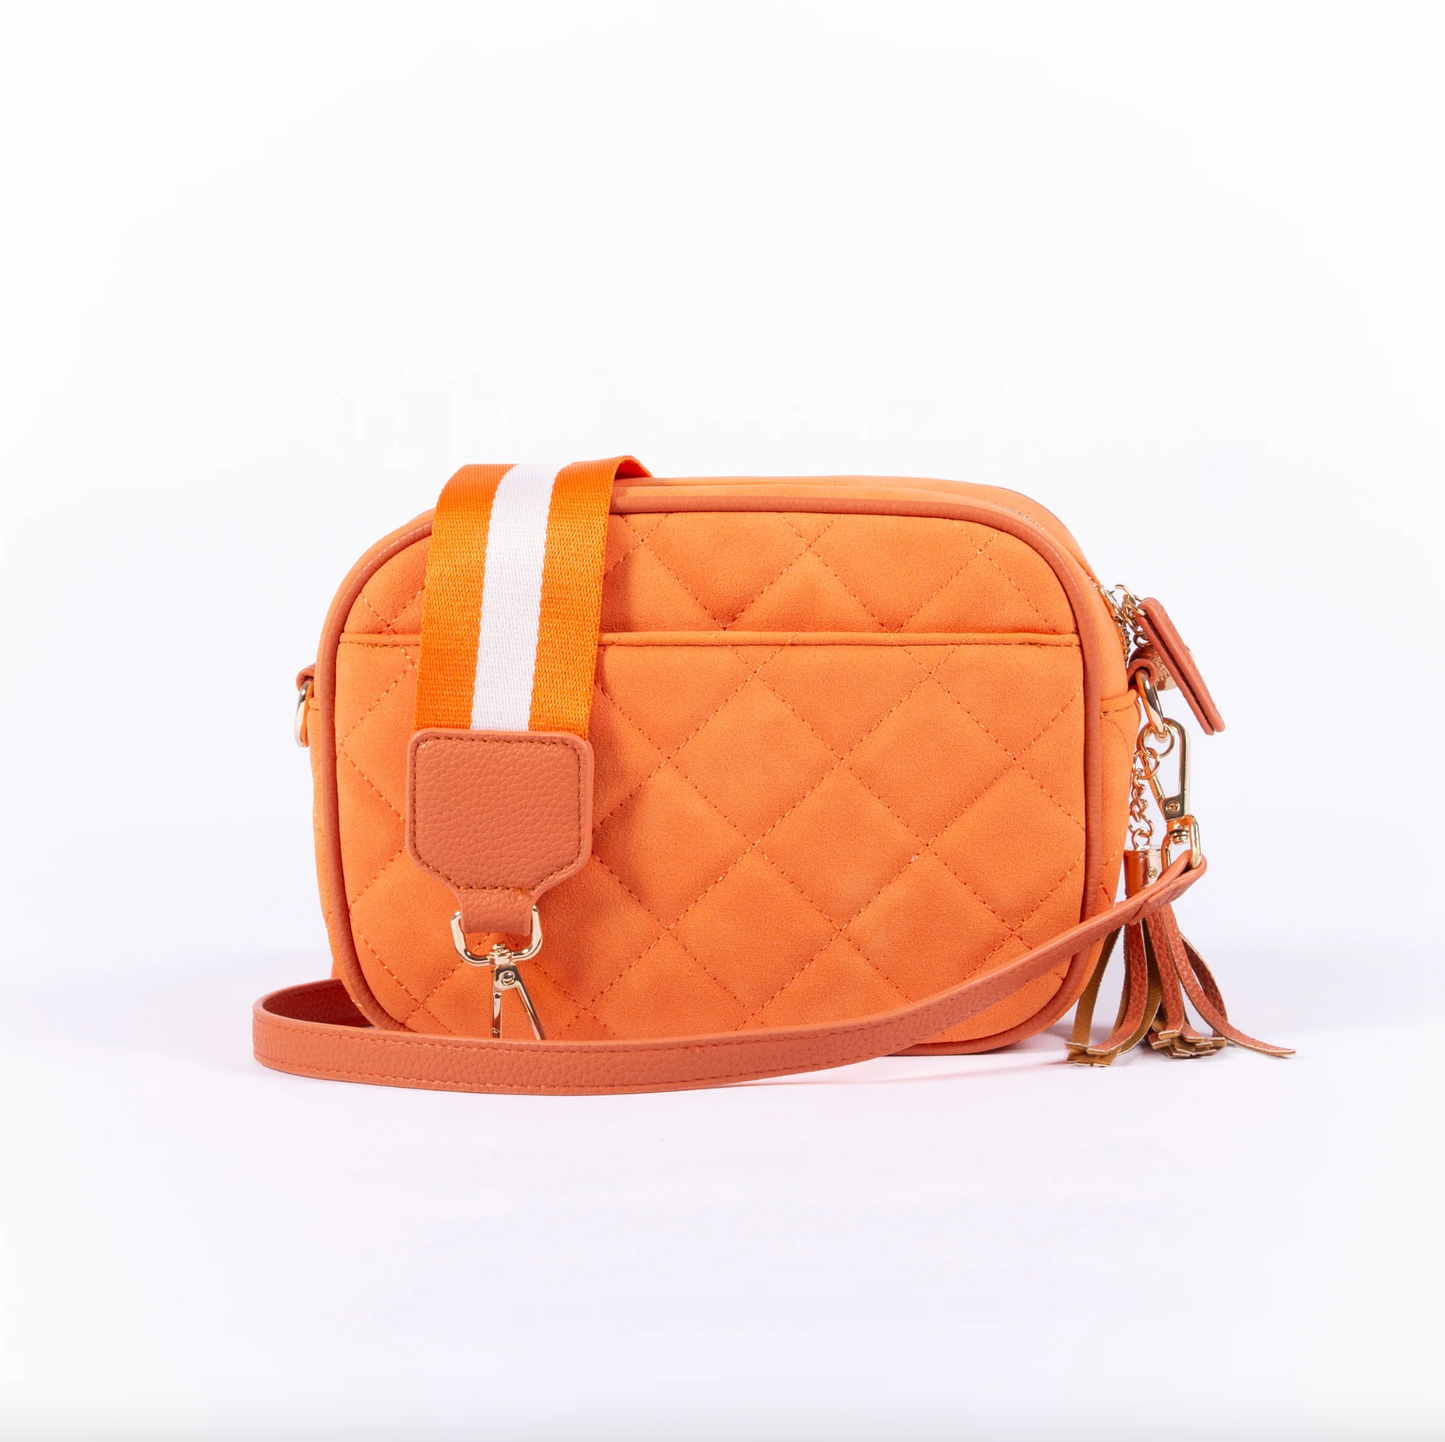 Sally Bag in Apricot Suede